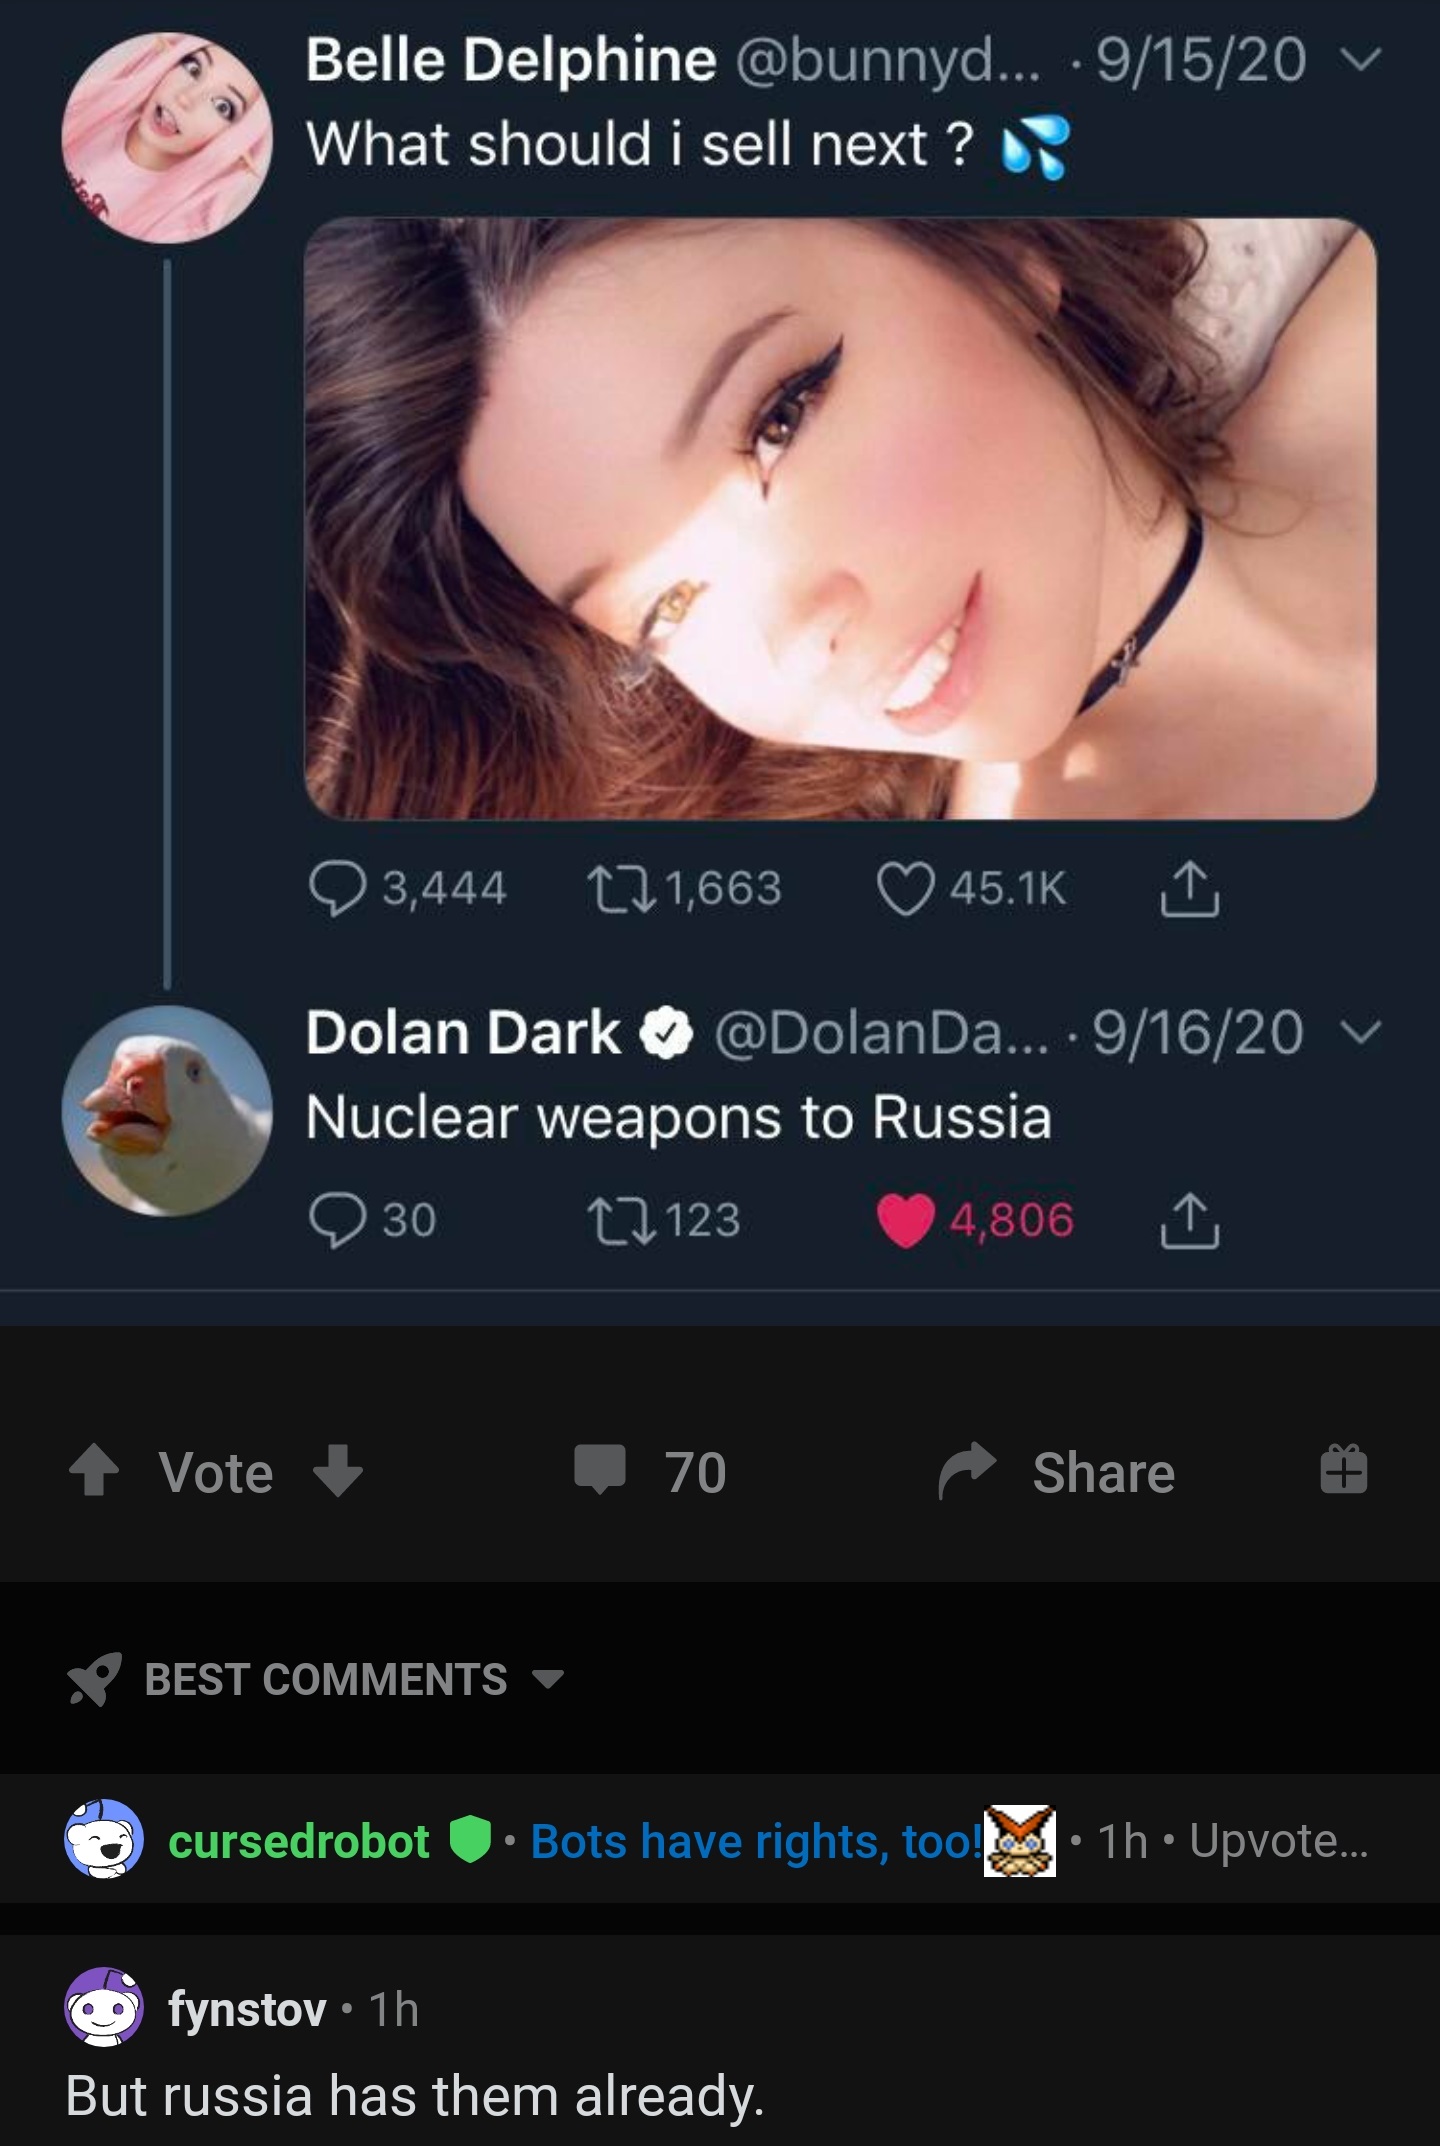 screenshot - Belle Delphine ... . 91520 V What should i sell next? 3,444 17 1,663 Dolan Dark ... 91620 V Nuclear weapons to Russia 30 22 123 4,806 Vote 70 Best cursedrobot Bots have rights, too! 1h Upvote... fynstov 1h But russia has them already.